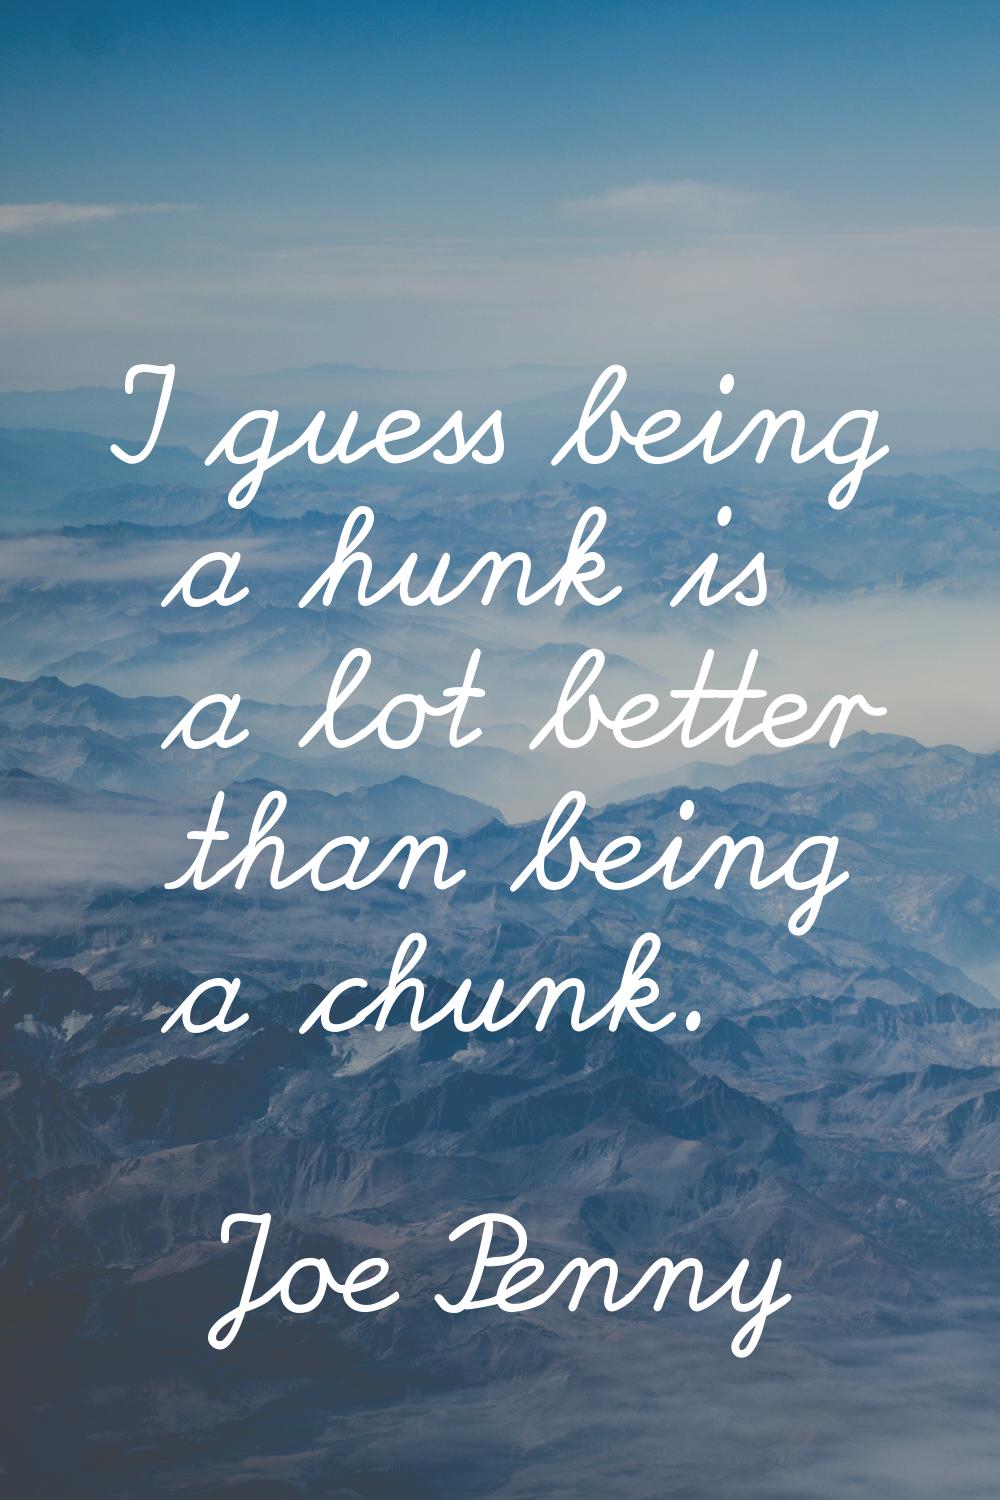 I guess being a hunk is a lot better than being a chunk.